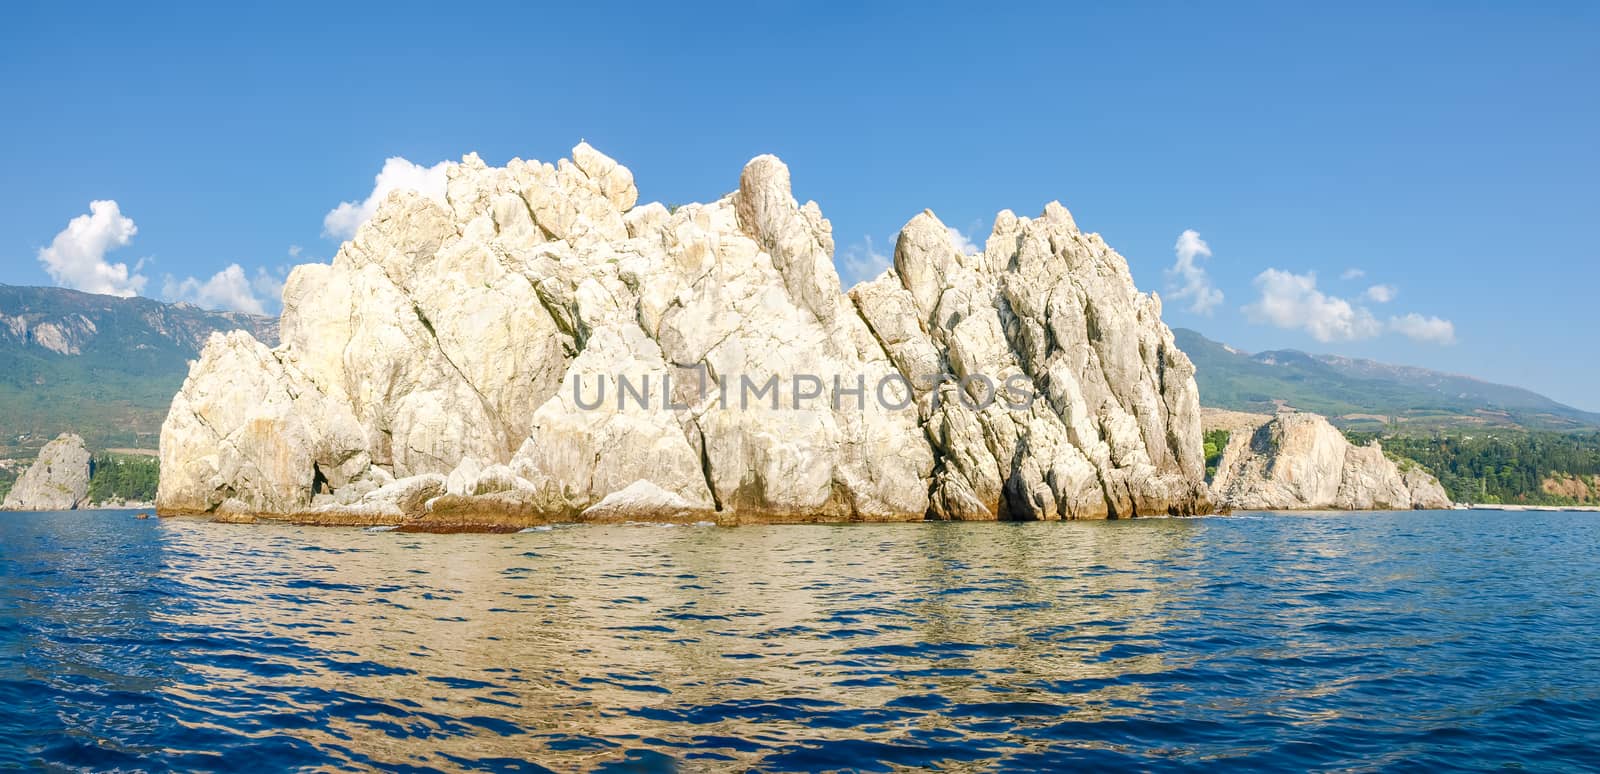 Panorama of the single limestone rock in the sea on a background of the sky and shore with rocks and mountain slopes overgrown with forest
